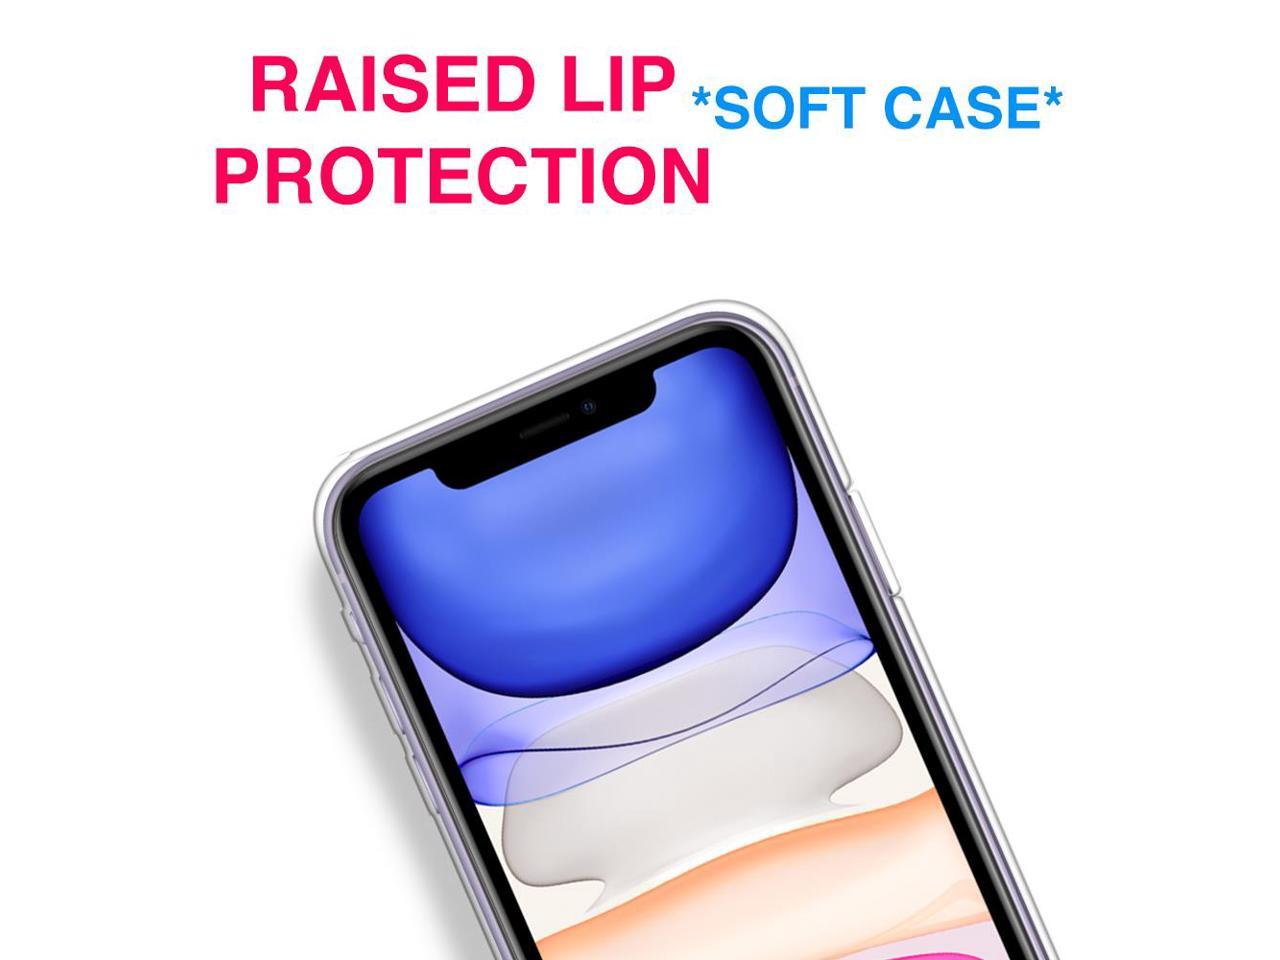 ikasus Case for iPhone 11,Clear Embossed Art Painted Pattern Design Soft & Flexible TPU Ultra-Thin Shockproof Transparent Girls Women TPU Case Cover for iPhone 11 Silicone Case,Lion 